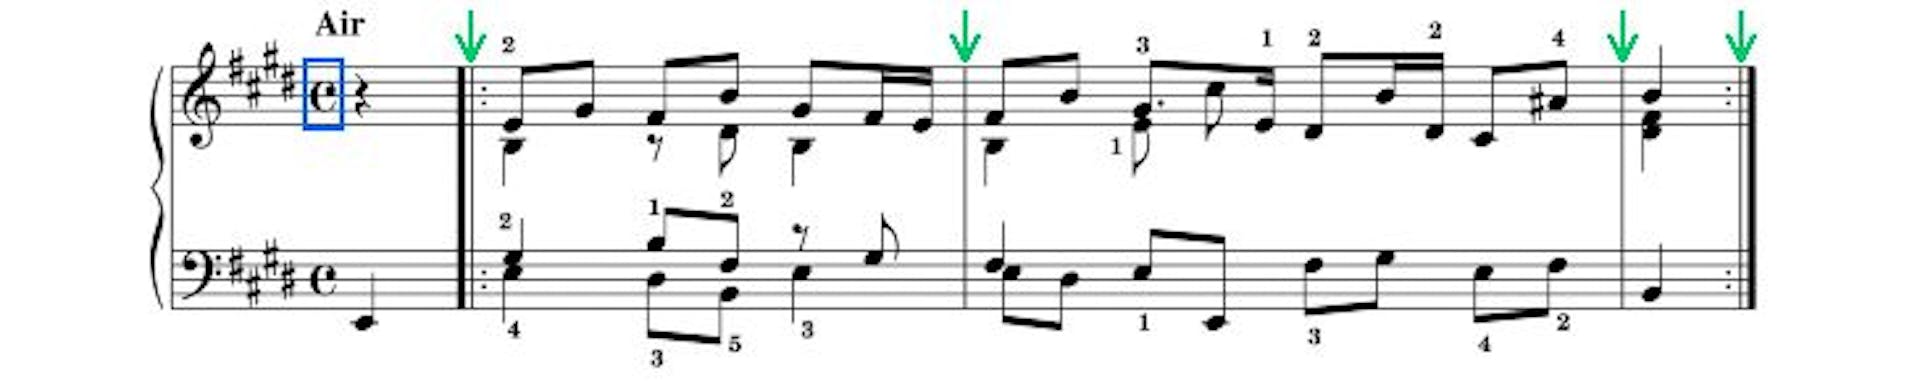 Common time signature is marked with the blue box